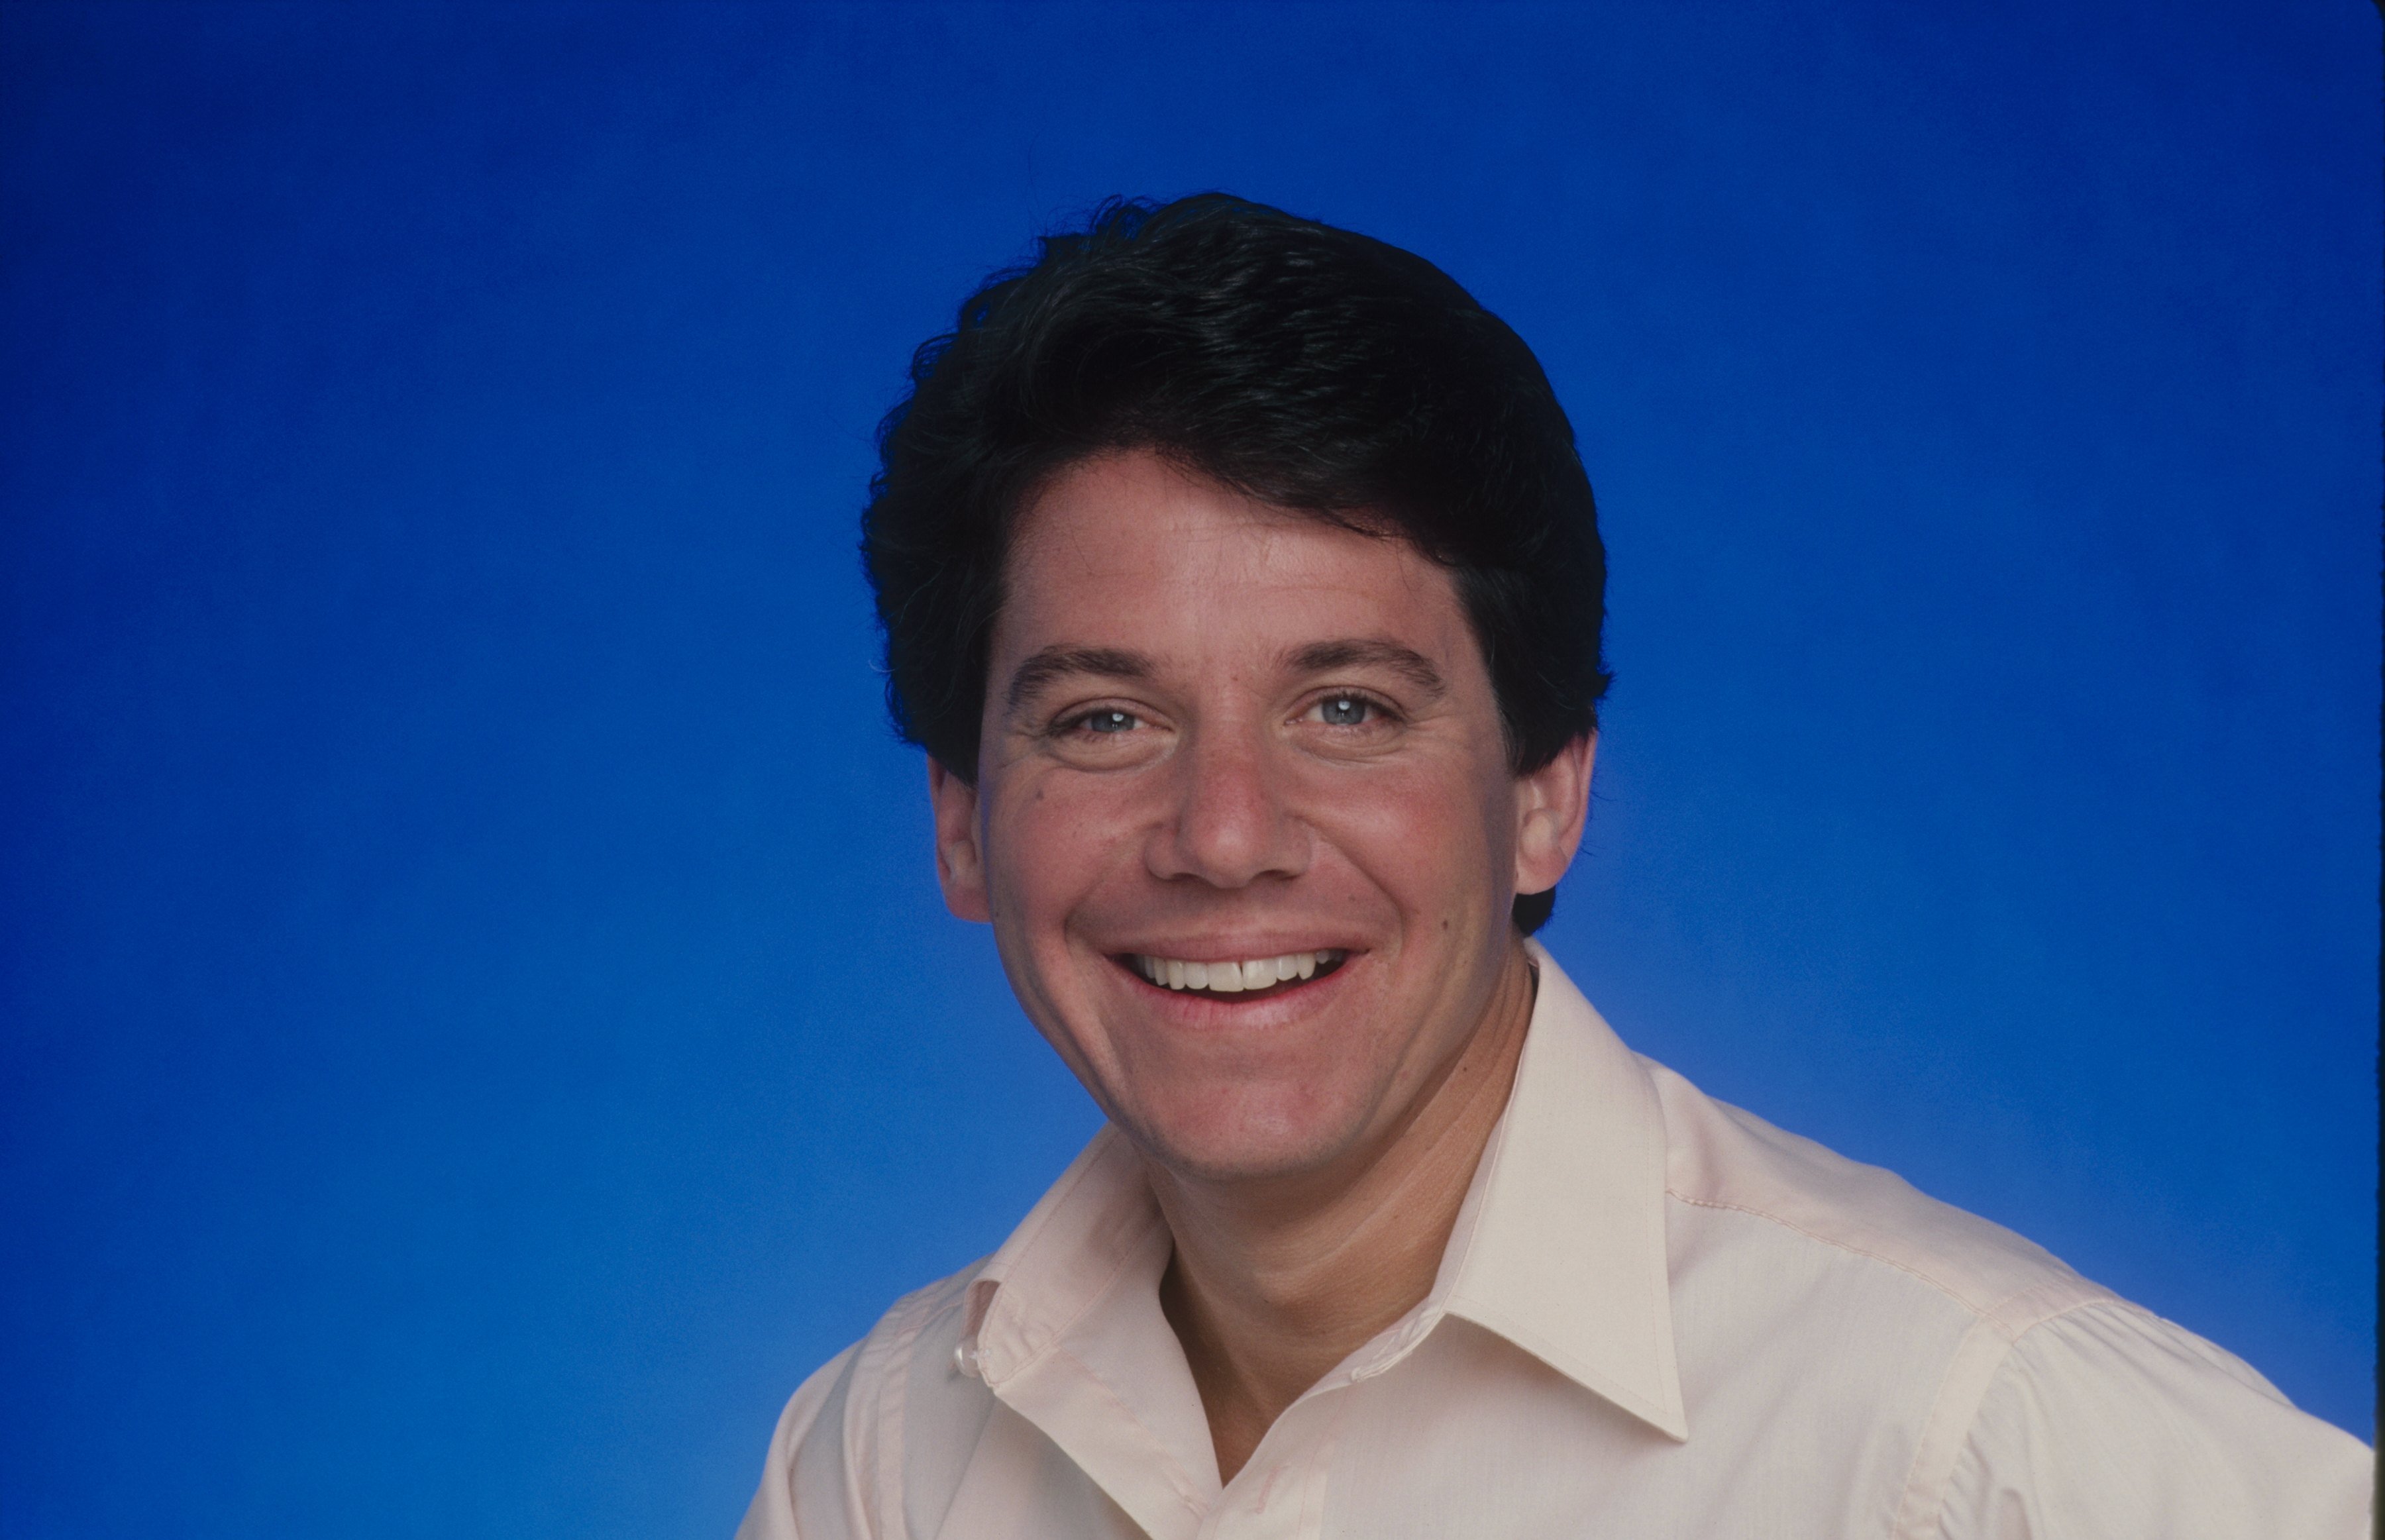 Anson Williams as Potsie Weber in "Happy Days" | Photo: GettyImages